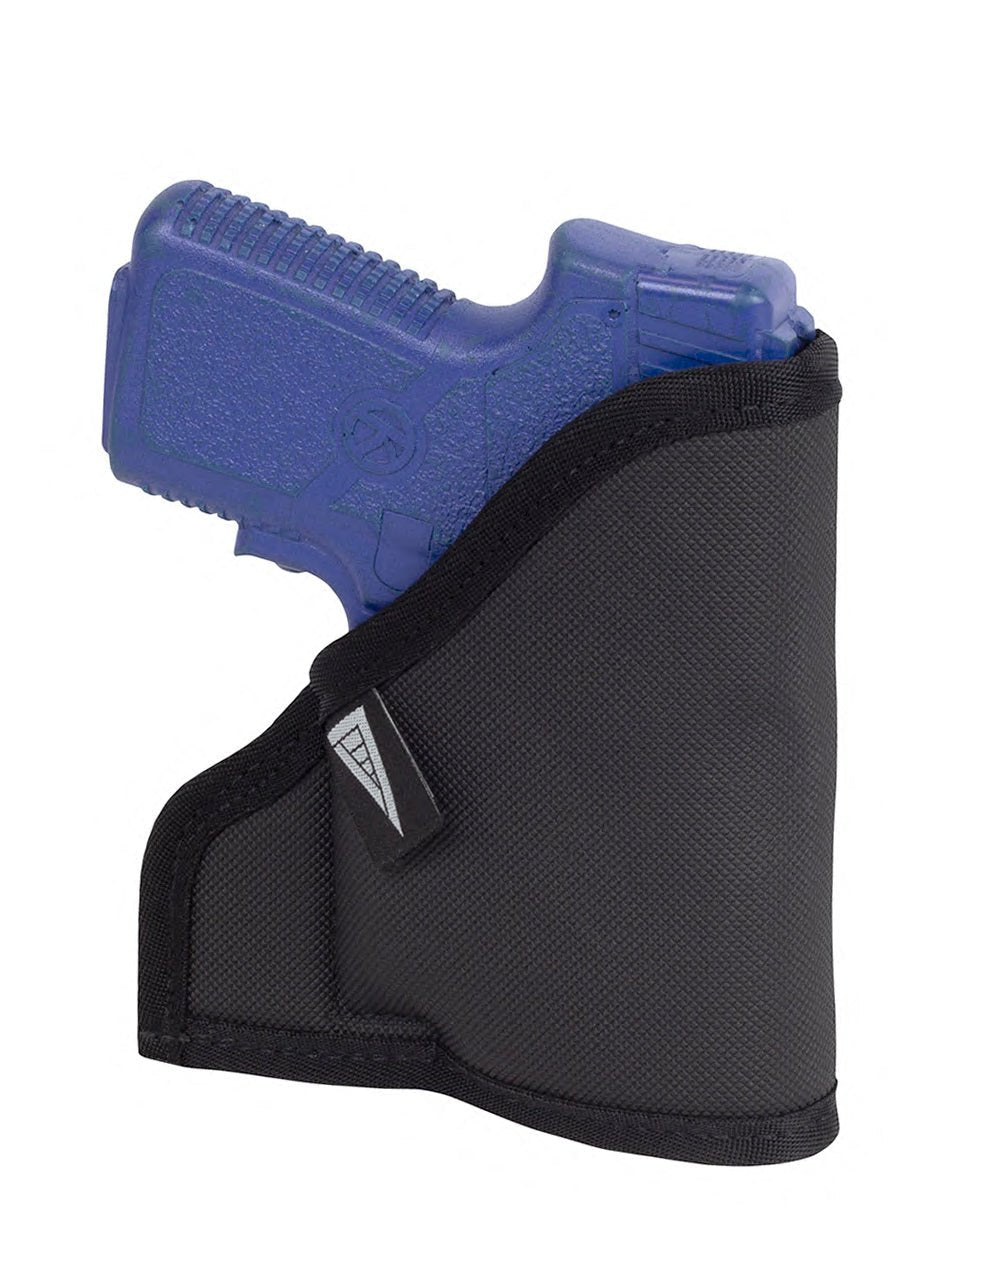 Elite Survival Systems - Pocket Holster - Angler's Pro Tackle & Outdoors